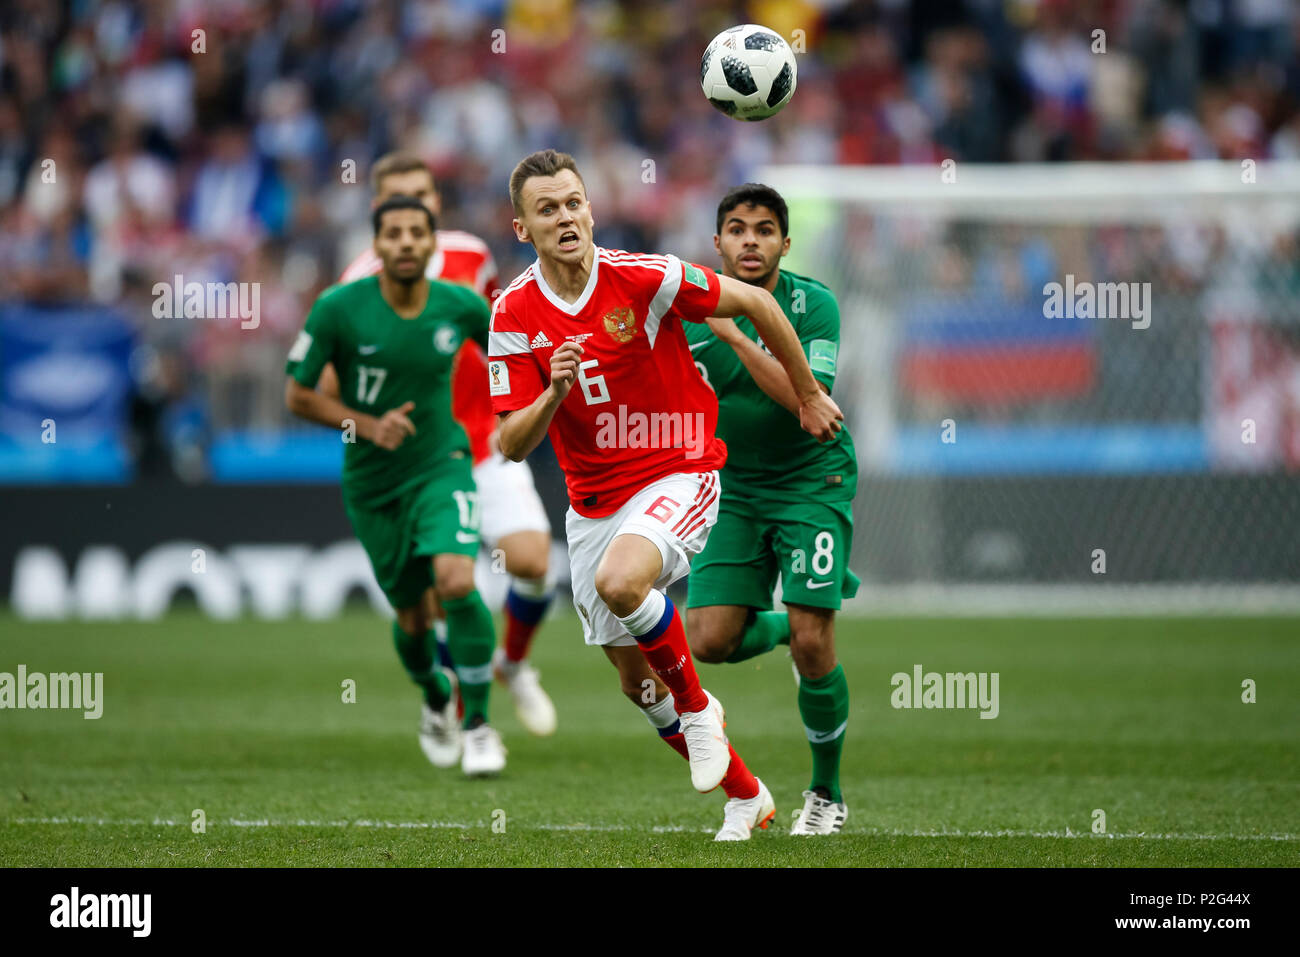 Moscow, Russia. 14th June 2018. Denis Cheryshev of Russia and Yahya Al-Shehri of Saudi Arabia during the 2018 FIFA World Cup Group A match between Russia and Saudi Arabia at Luzhniki Stadium on June 14th 2018 in Moscow, Russia. Credit: PHC Images/Alamy Live News Stock Photo